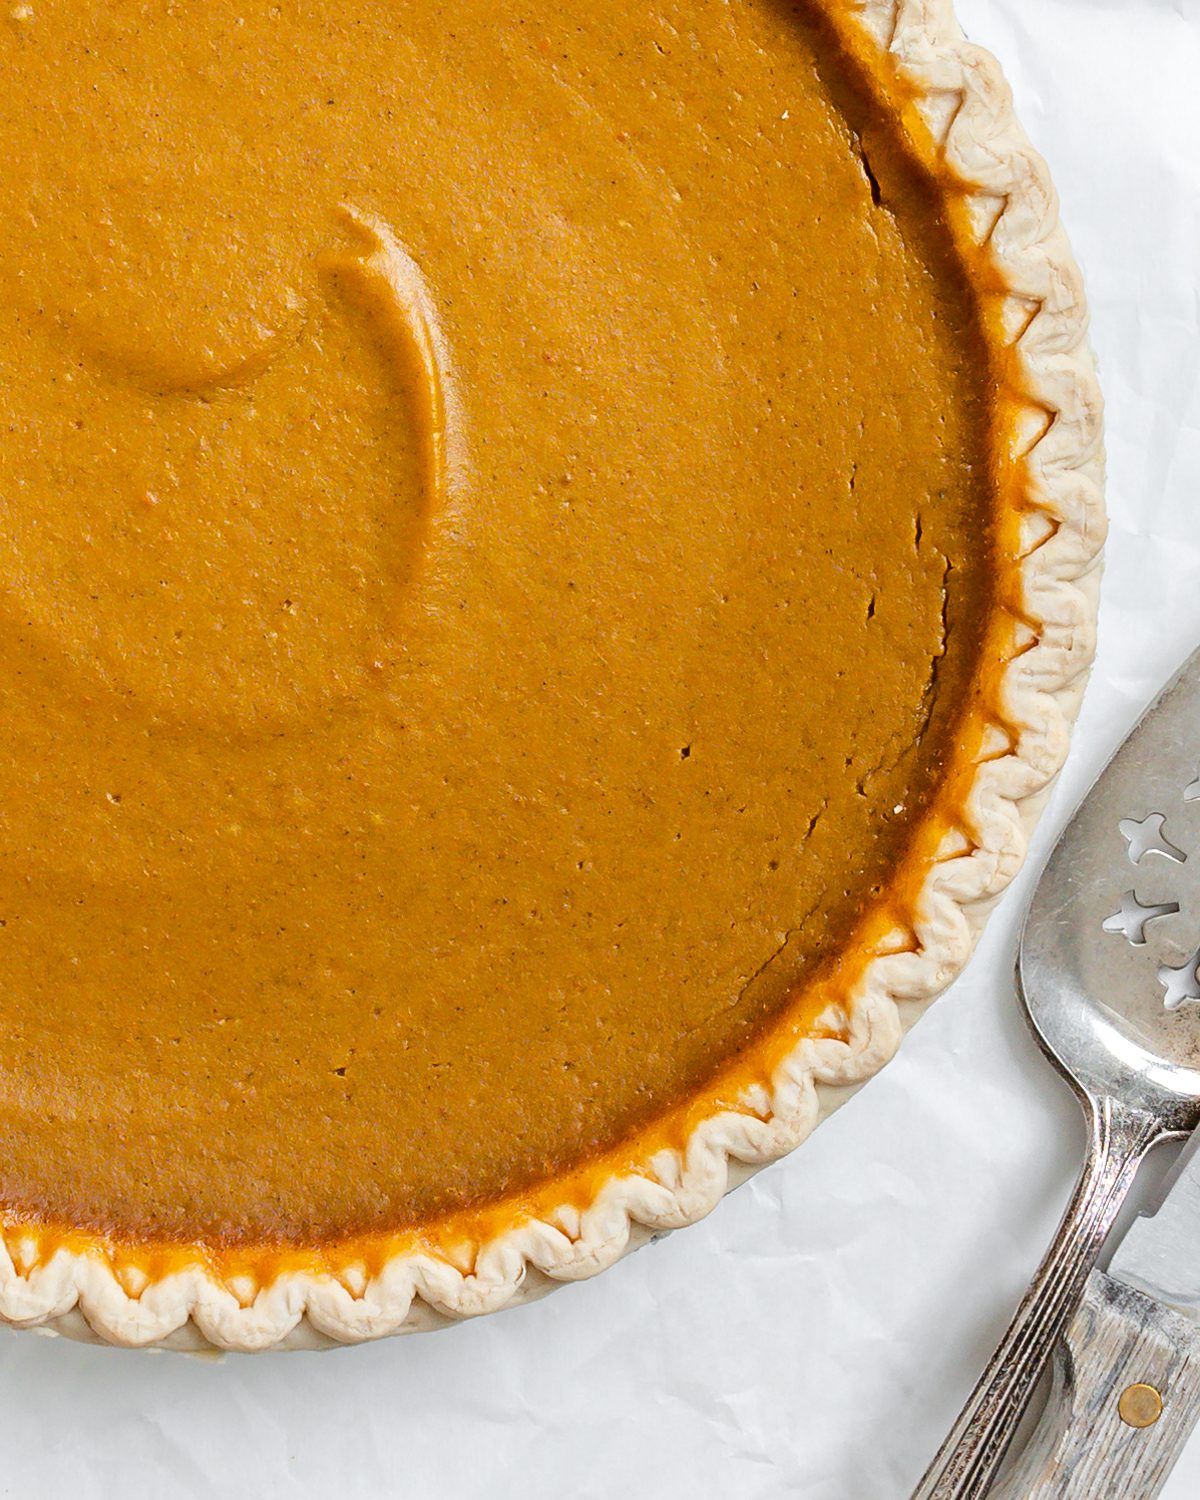 completed post baked Easy Vegan Pumpkin Pie against a white surface